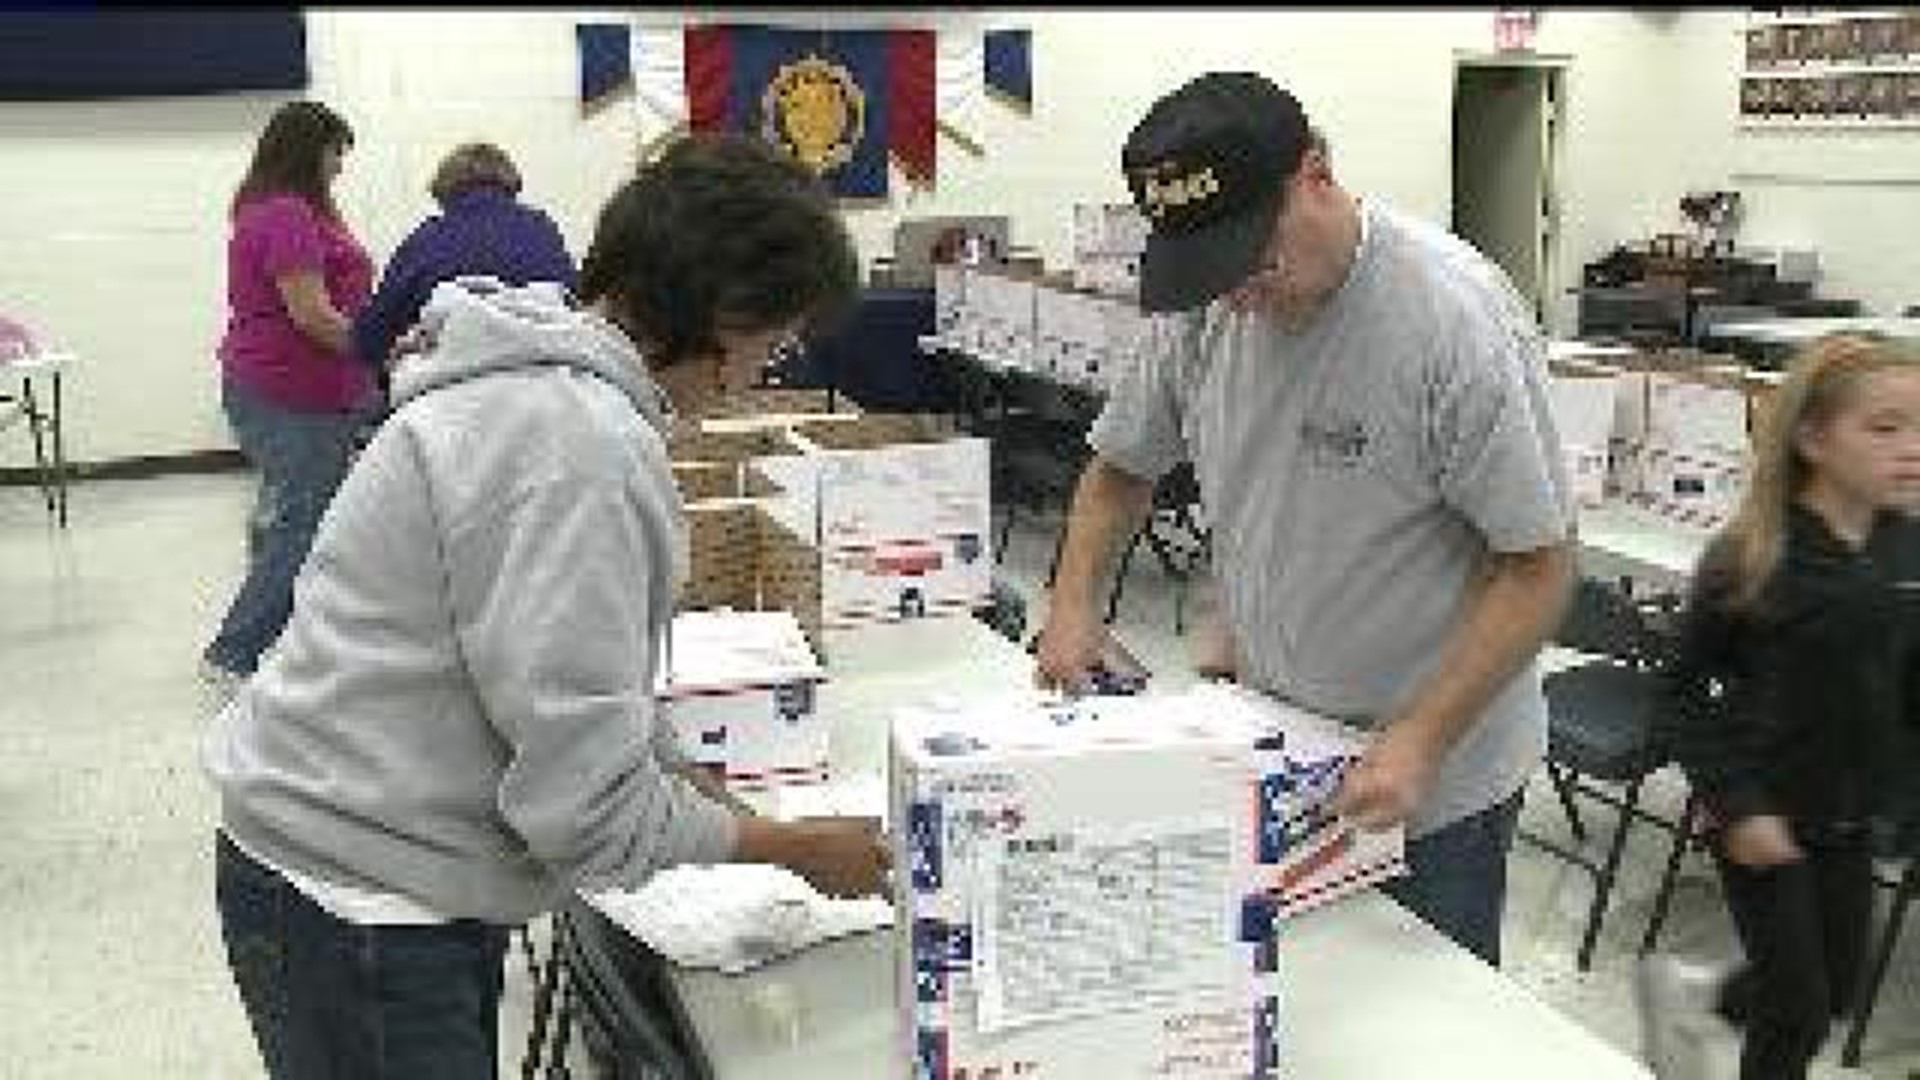 Community Packs Boxes For Sailors At Sea